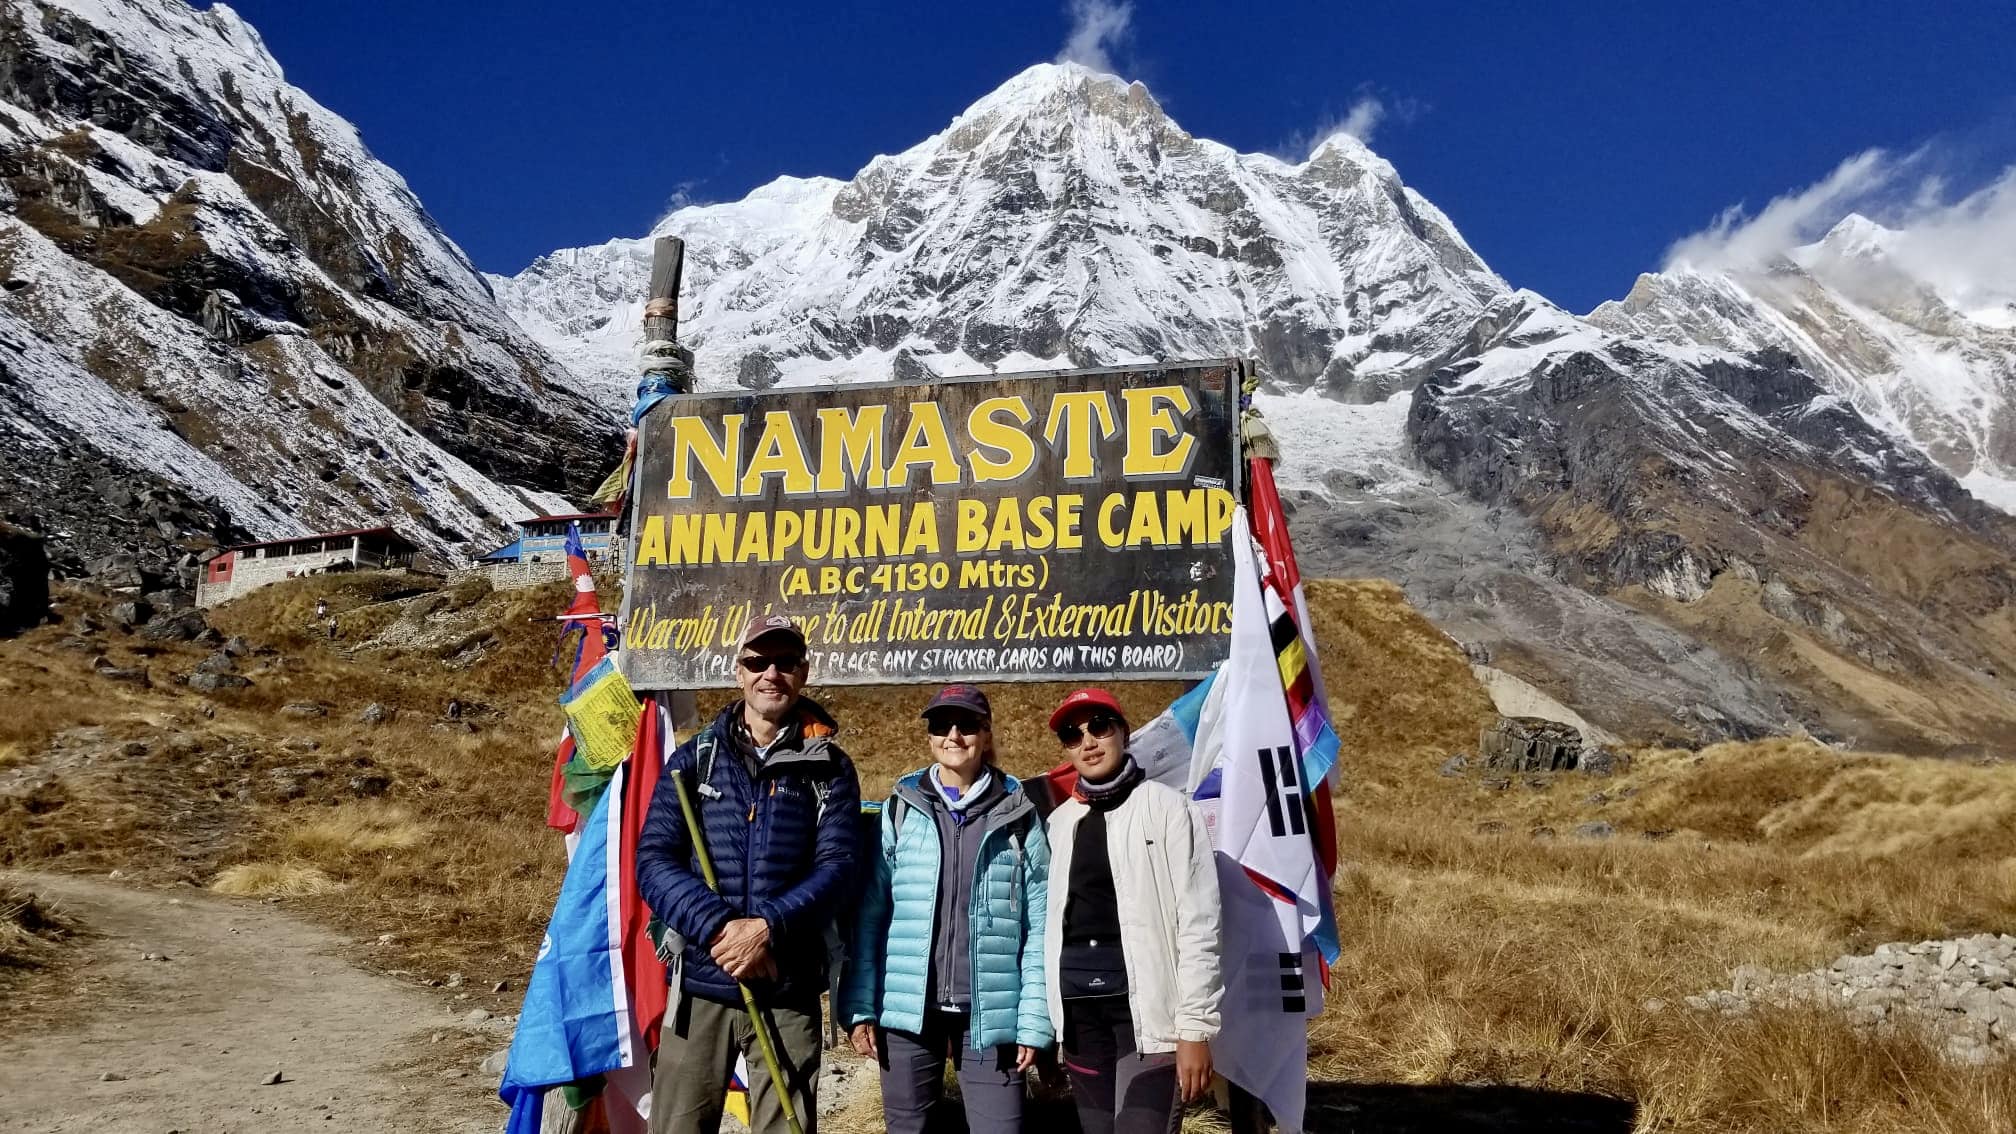 Required Permits for Annapurna Base Camp Trekking 